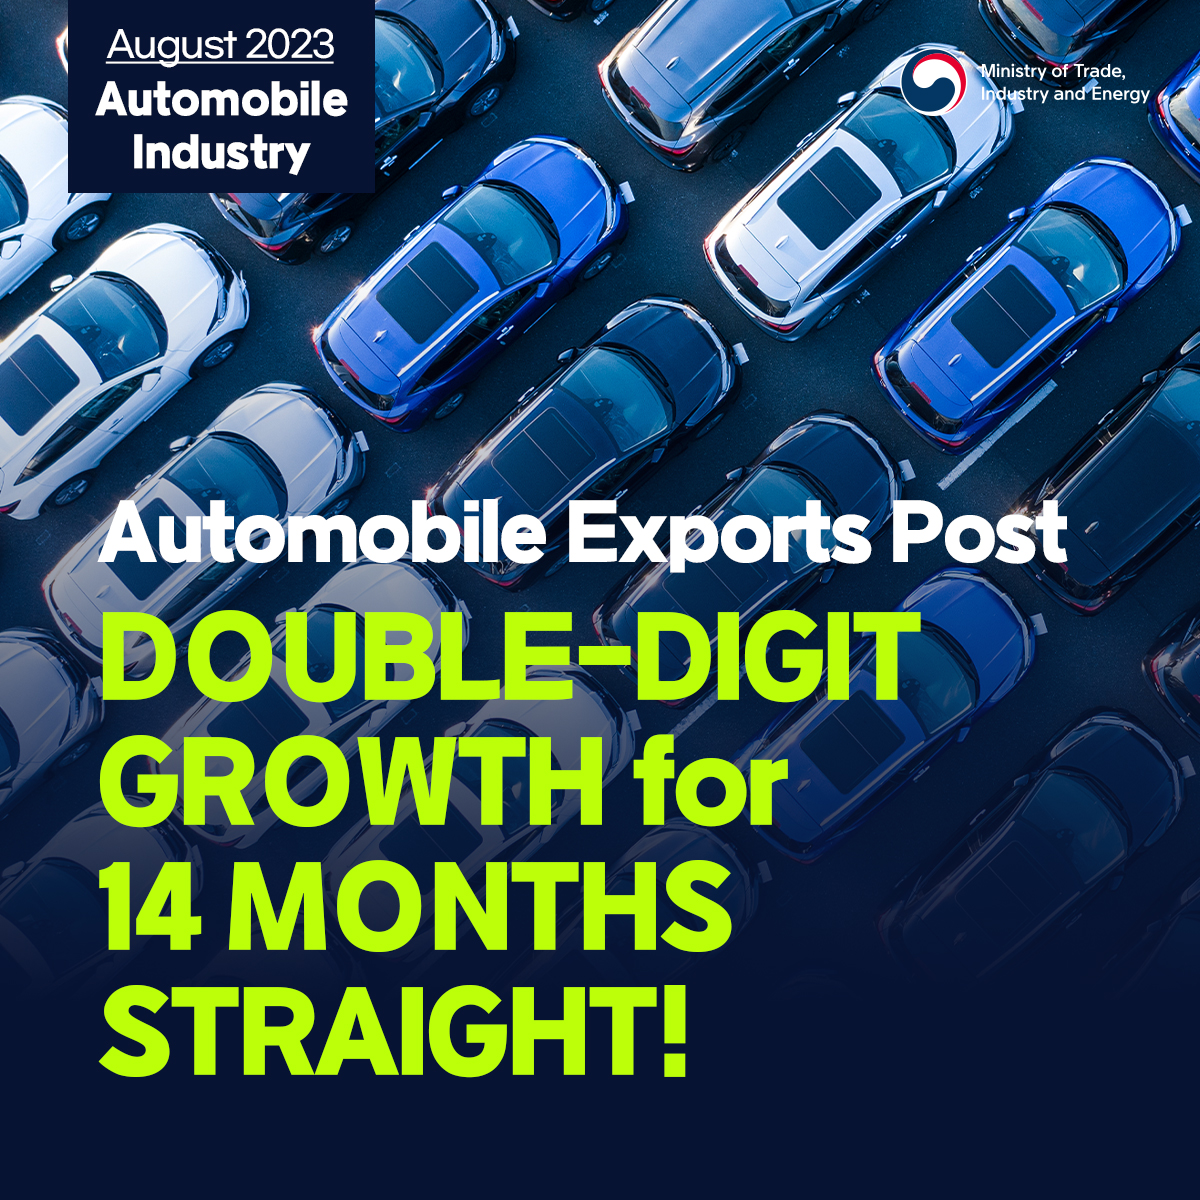 Korea's auto exports post double-digit growth for 14 months straight!